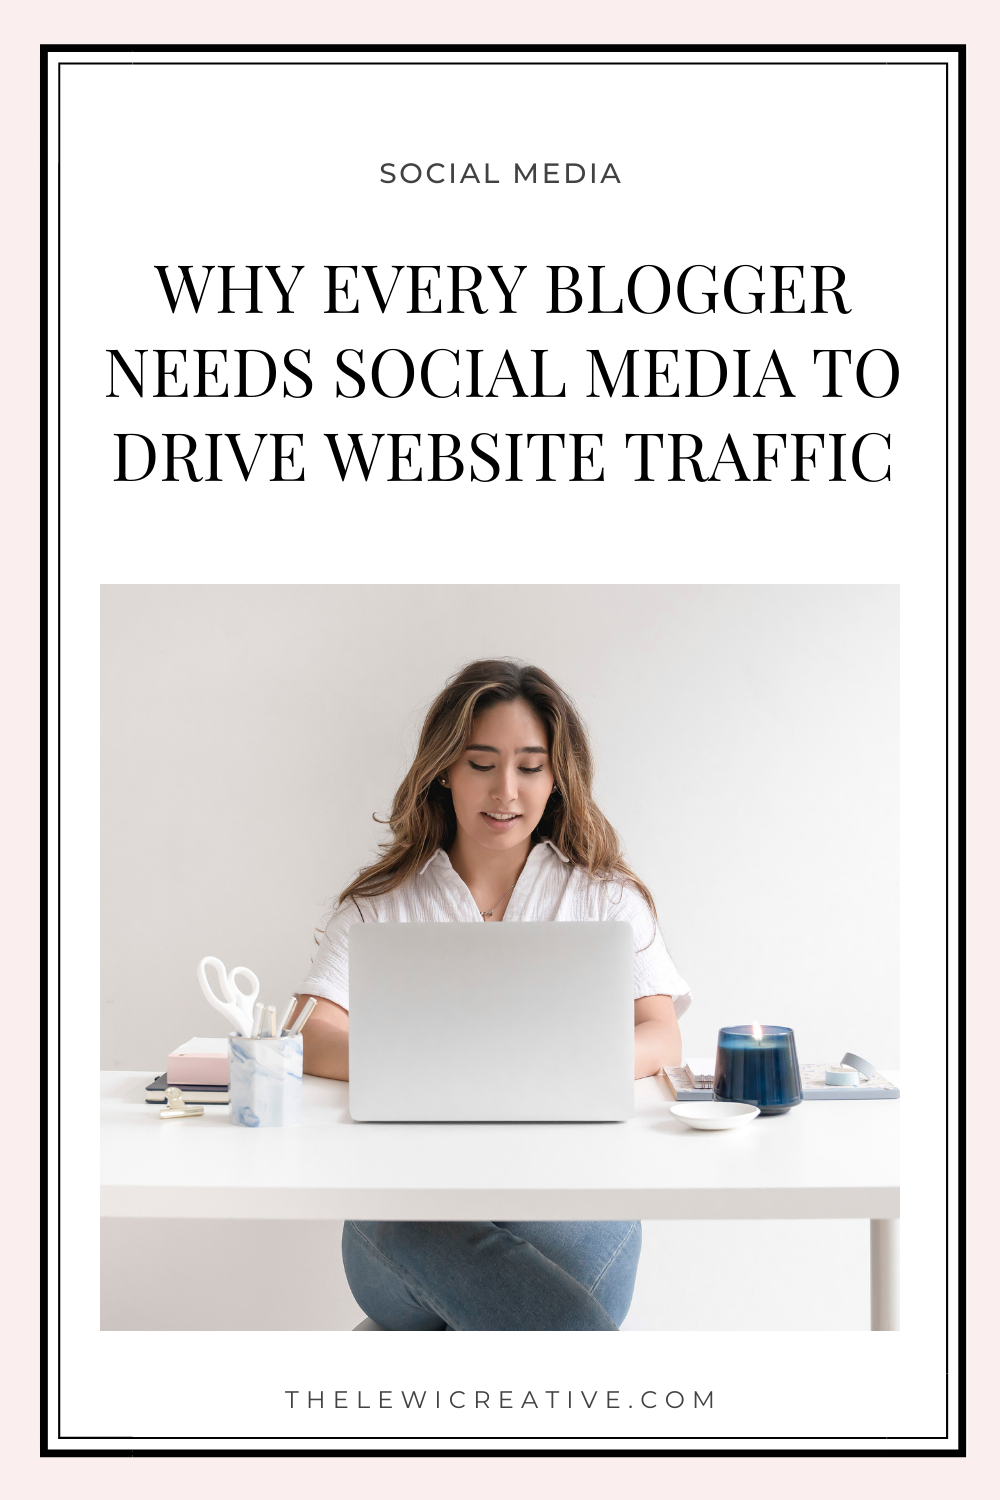 Why You Should Drive Traffic From Social Media